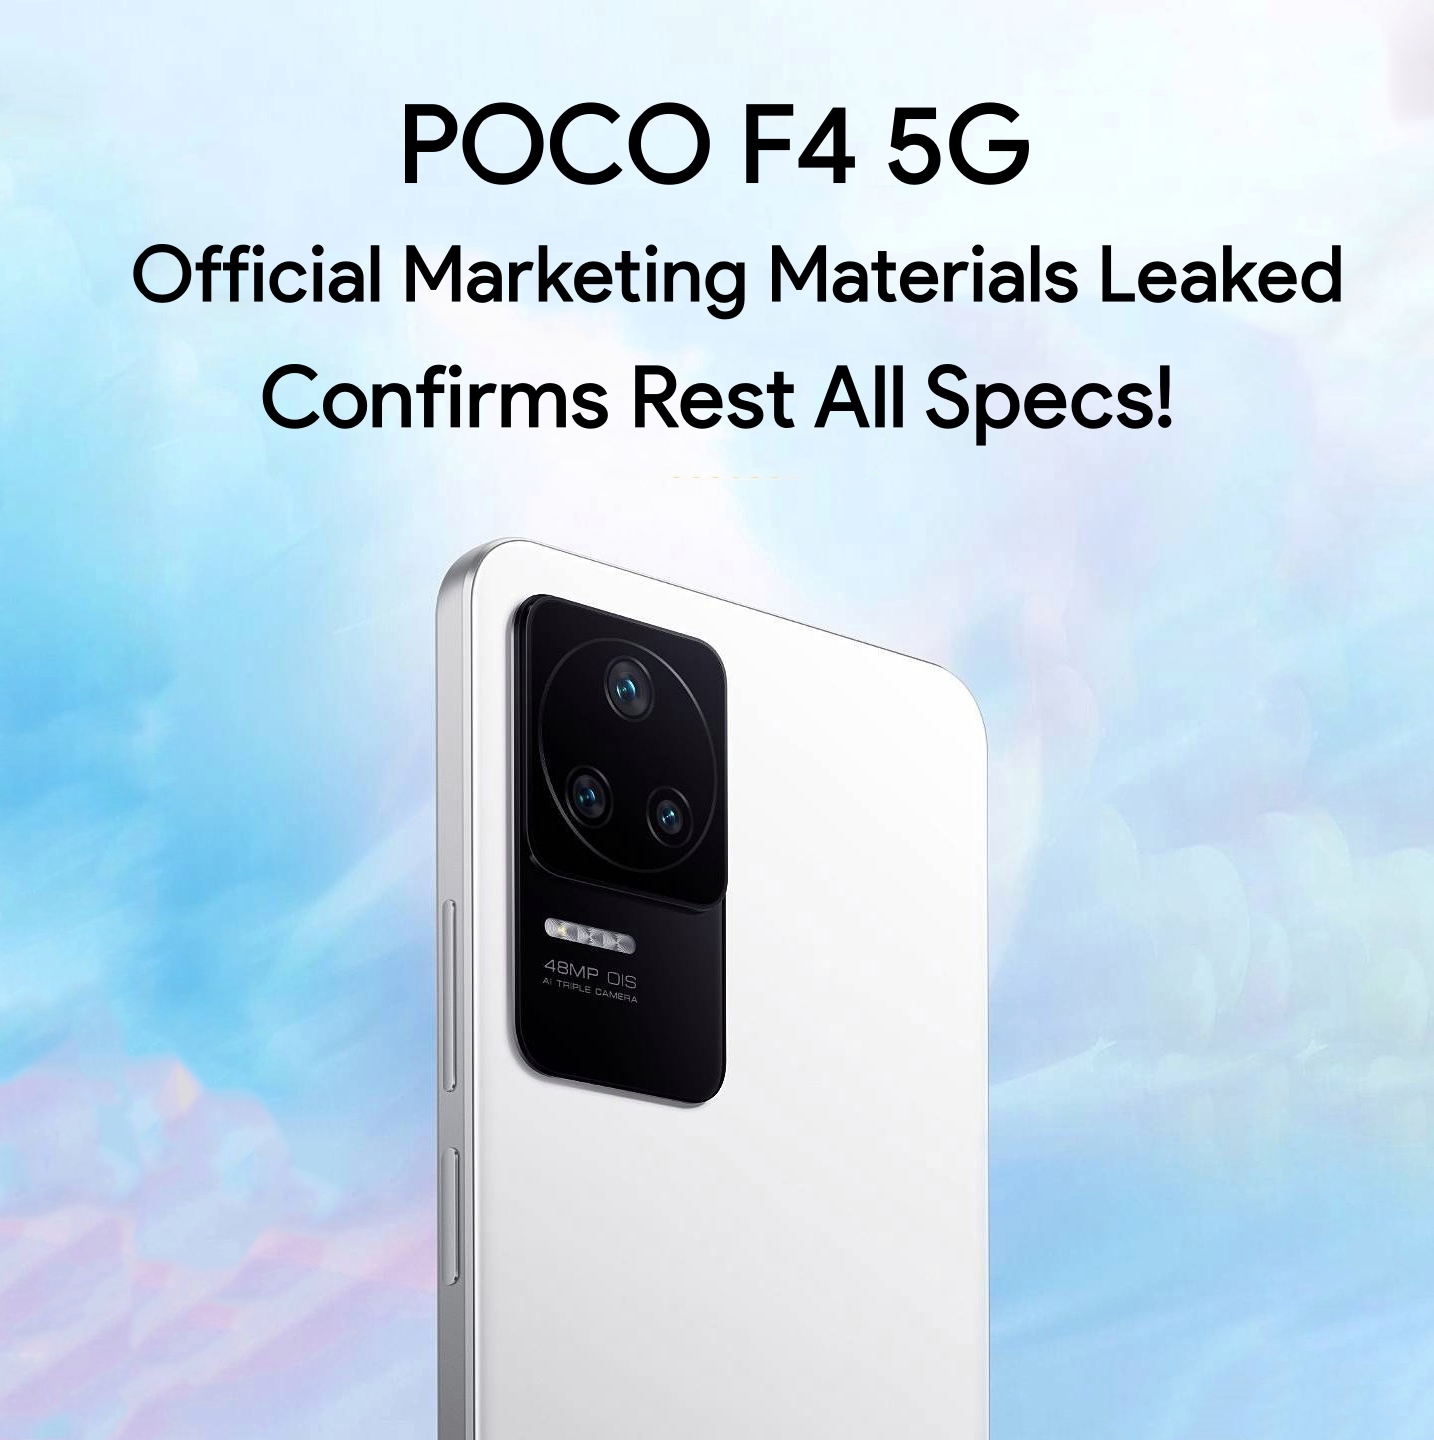 POCO F4 5G Official Marketing Materials Leaked, Confirms Rest All